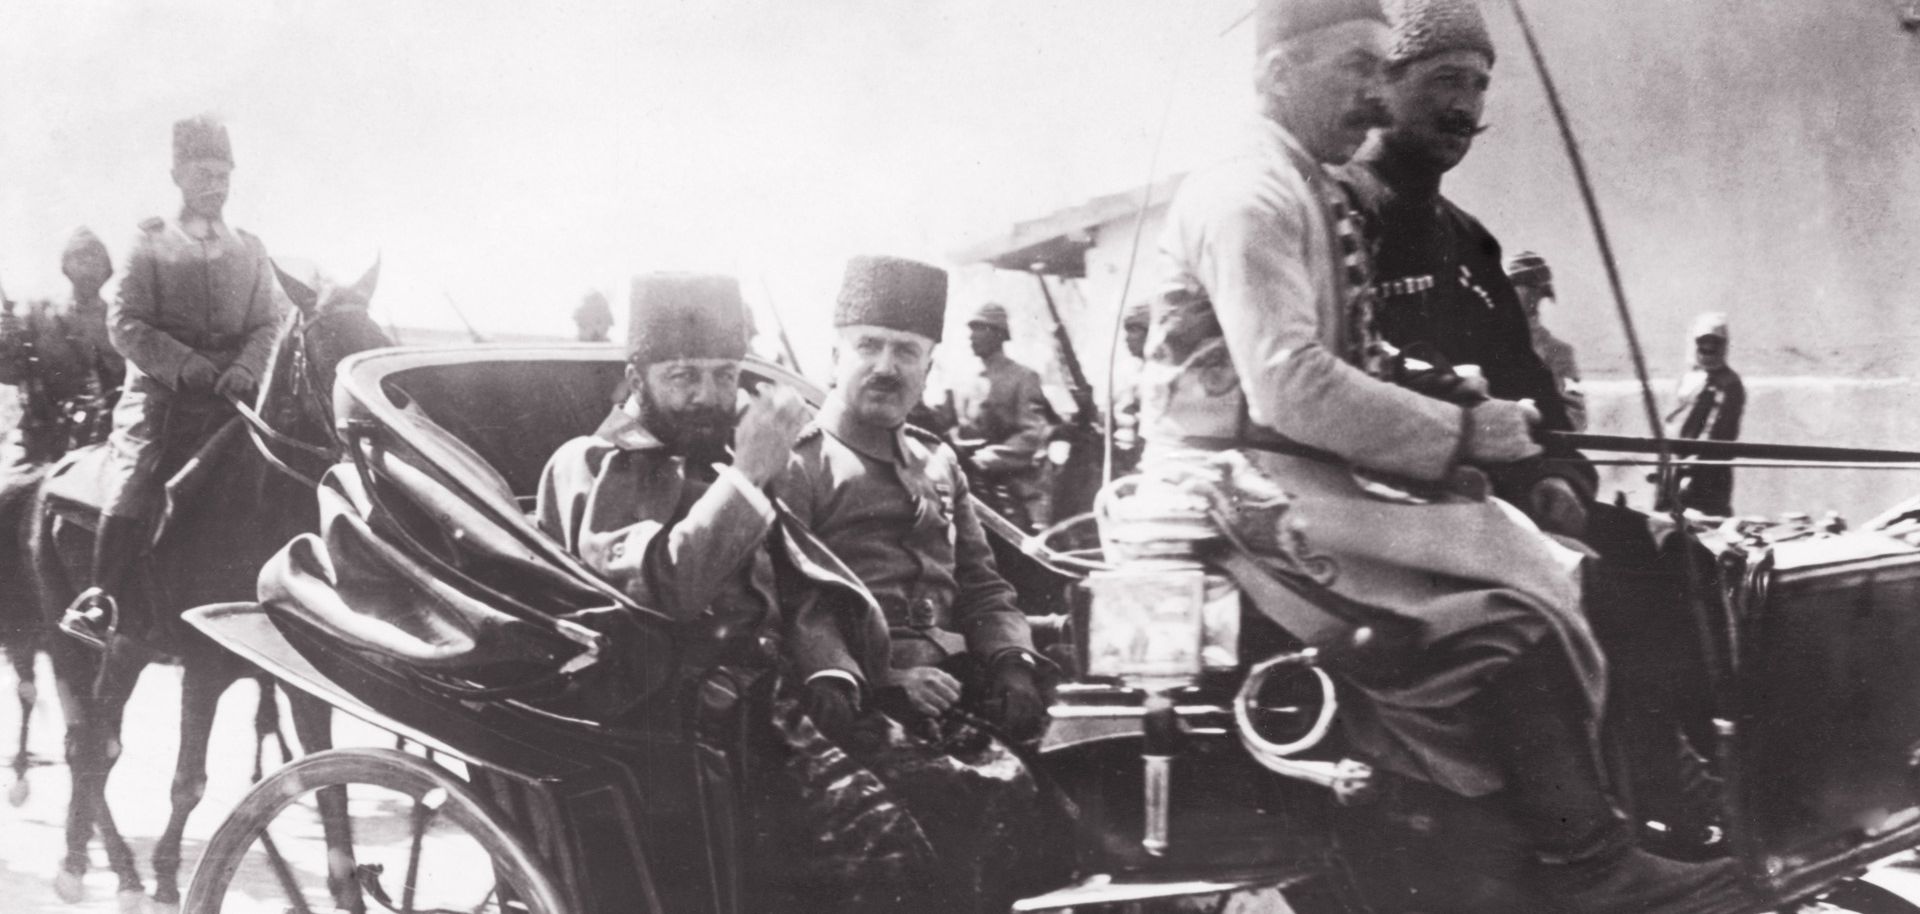 Jamal Pasha, the Ottoman governor of Syria, passes through Damascus on July 17, 1917. Under Ottoman rule, Syria existed as a collection of culturally diverse provinces.